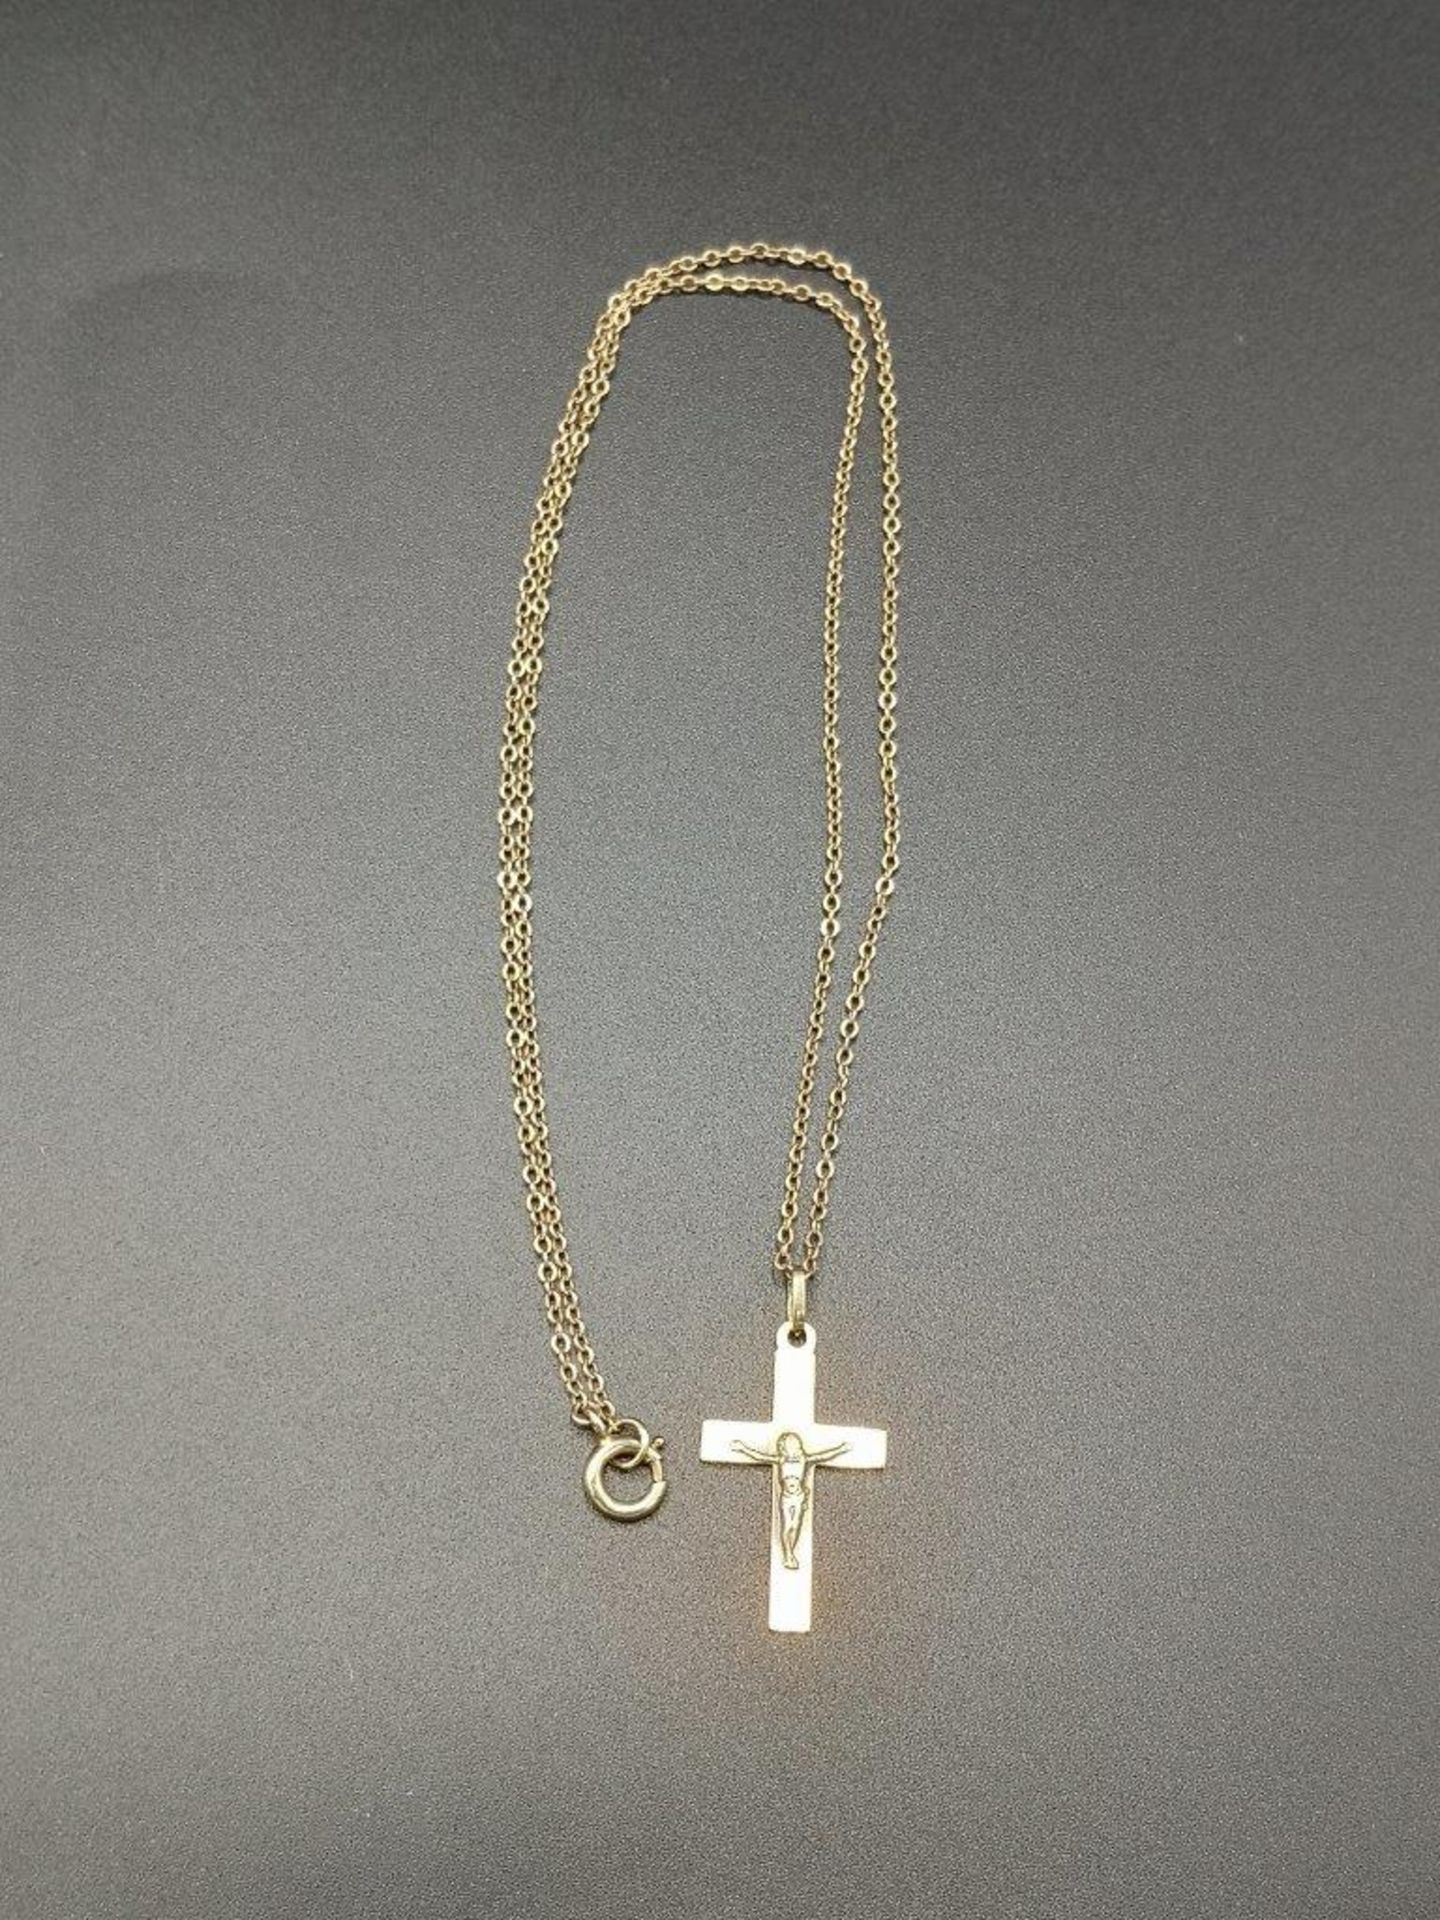 9ct gold necklace with crucifix pendant - Image 2 of 4